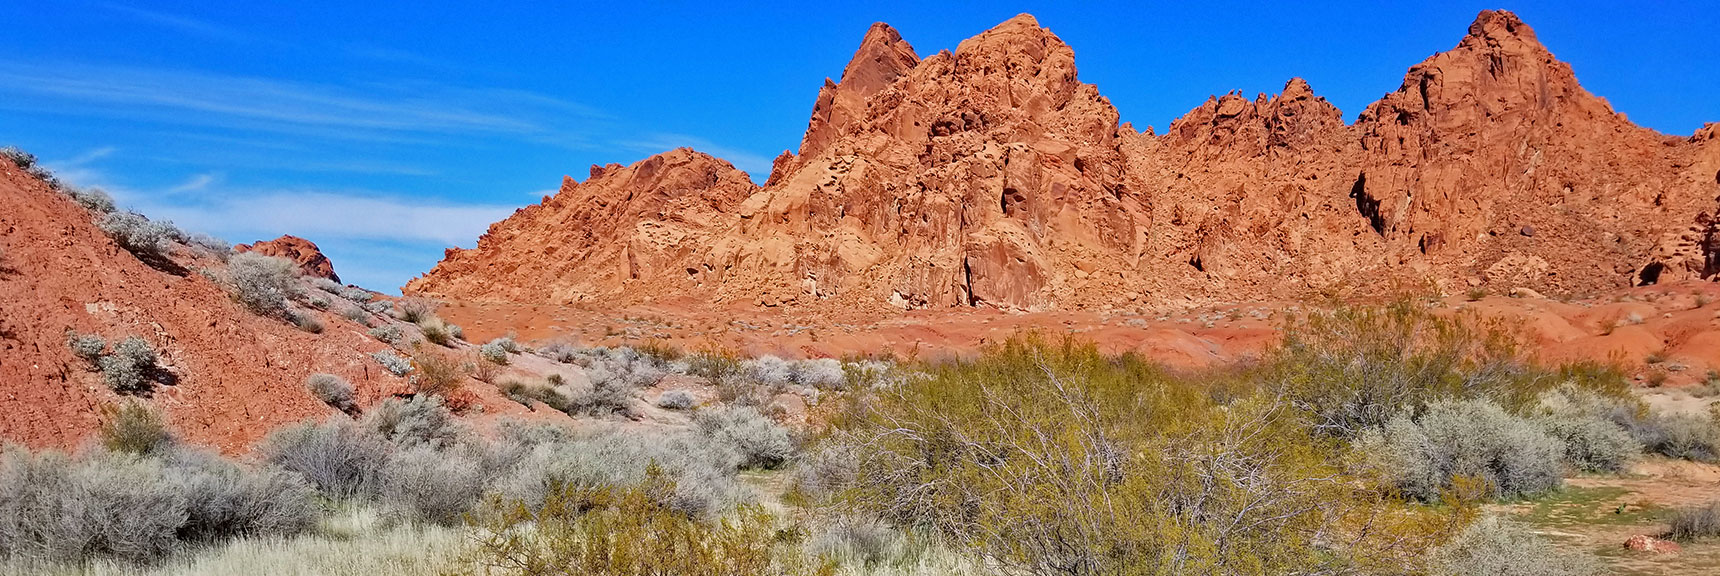 Starting Out on Natural Arches Trail, Valley of Fire State Park, Nevada